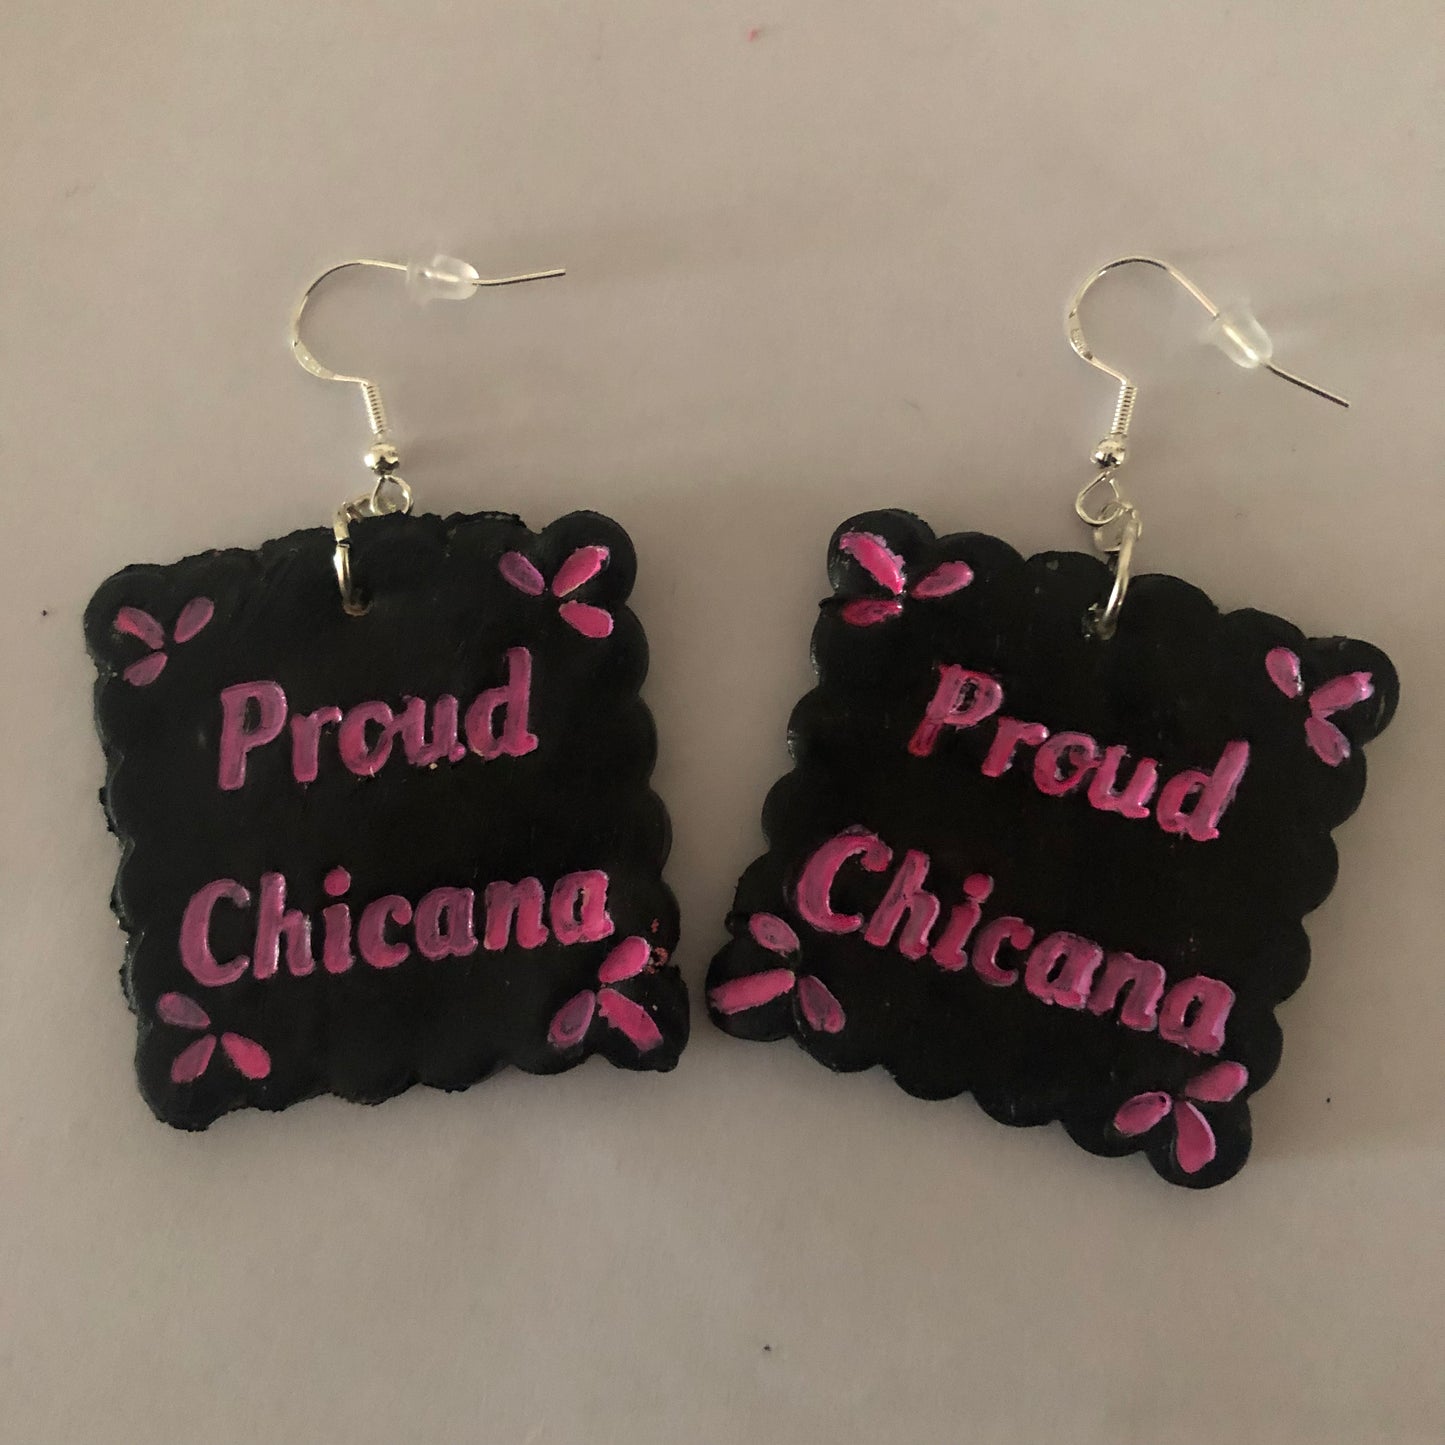 Proud Chicana polymer clay earrings